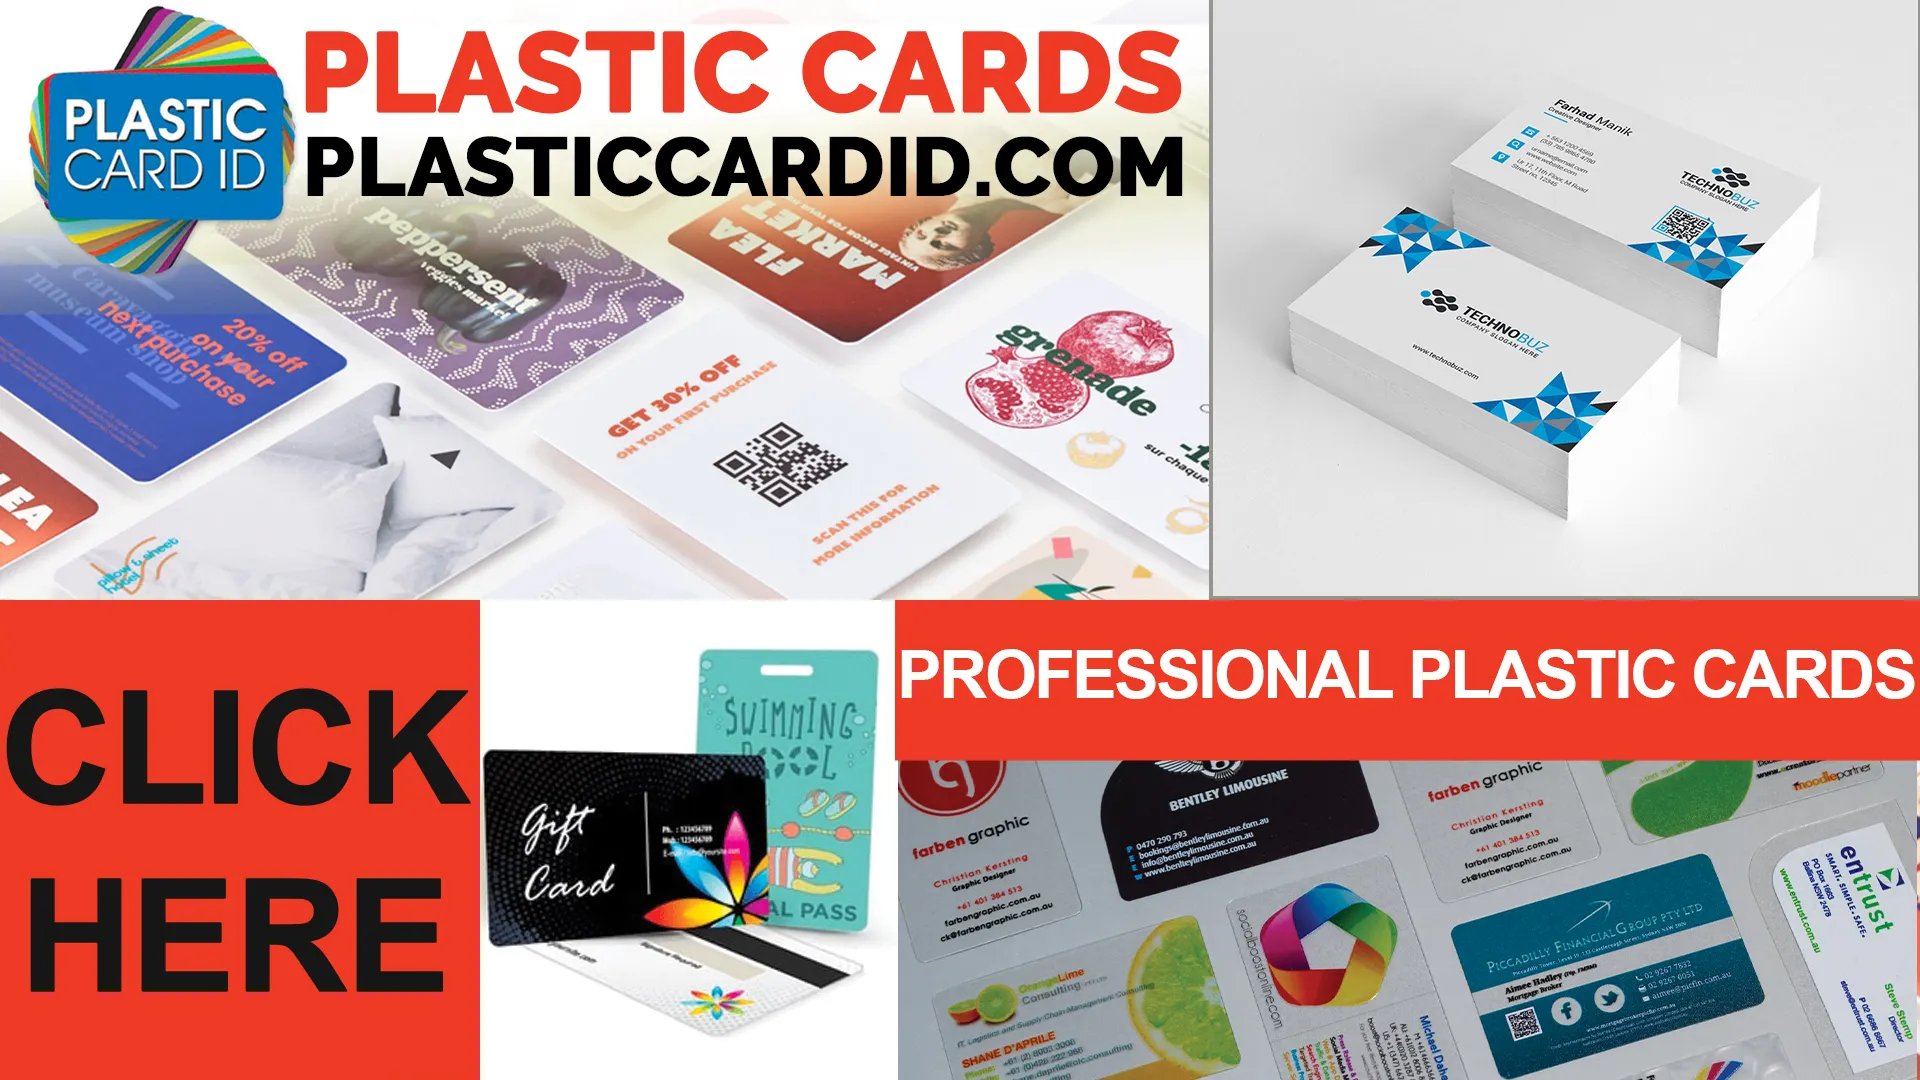 Welcome to the World of Enhanced Event Marketing with Plastic Cards!